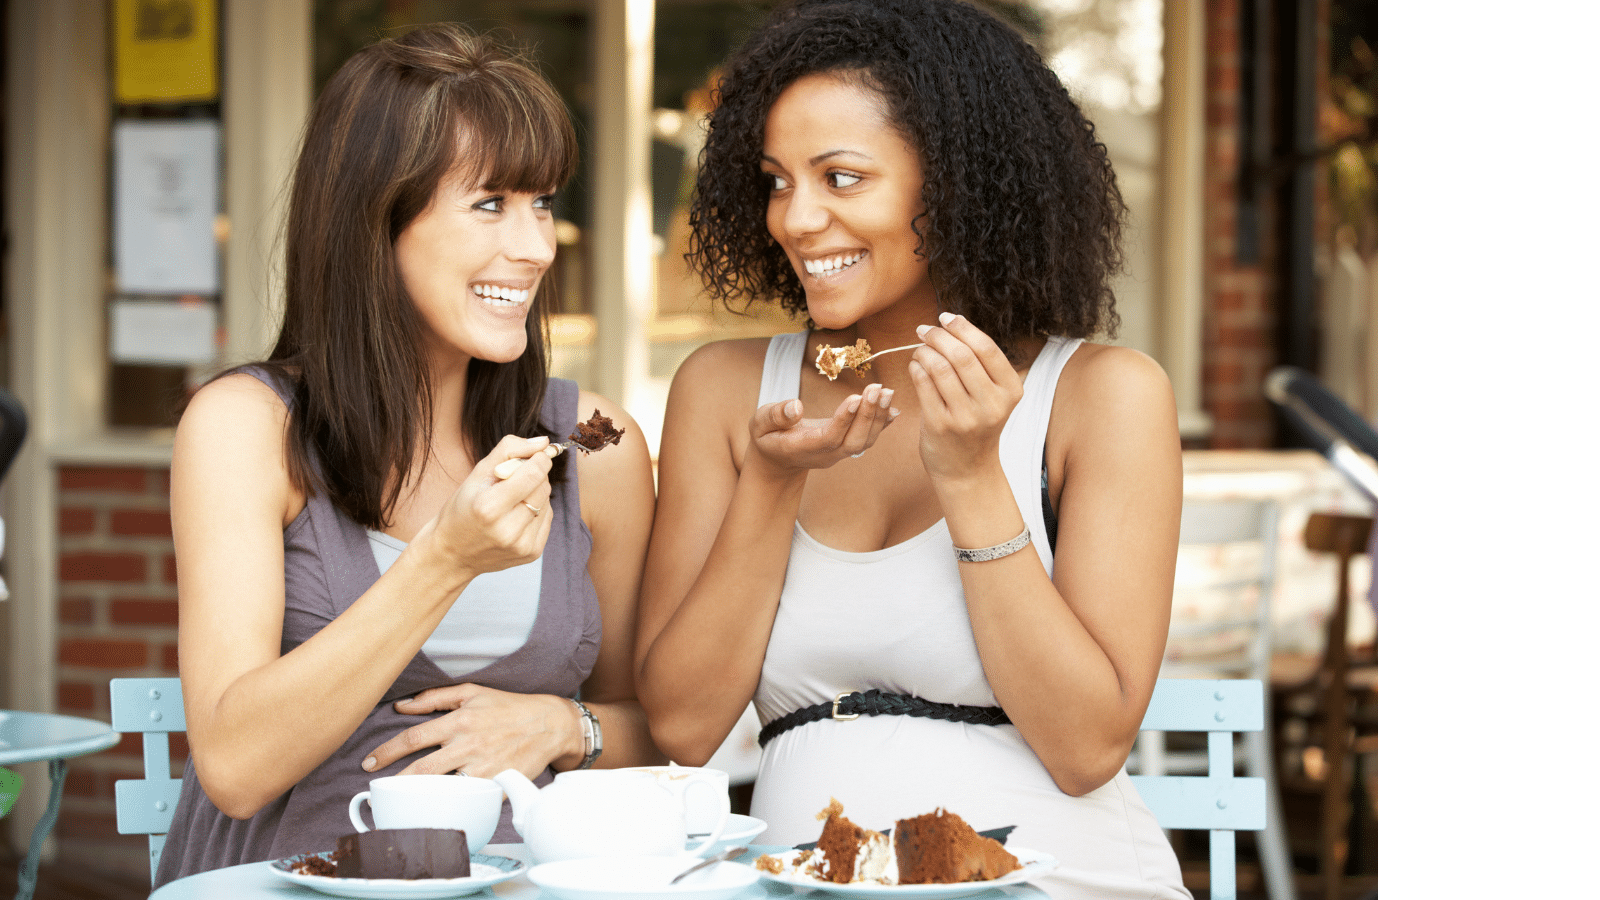 Two women, enjoying cake and coffee, laughing with each other. Eat, drink, and be merry.